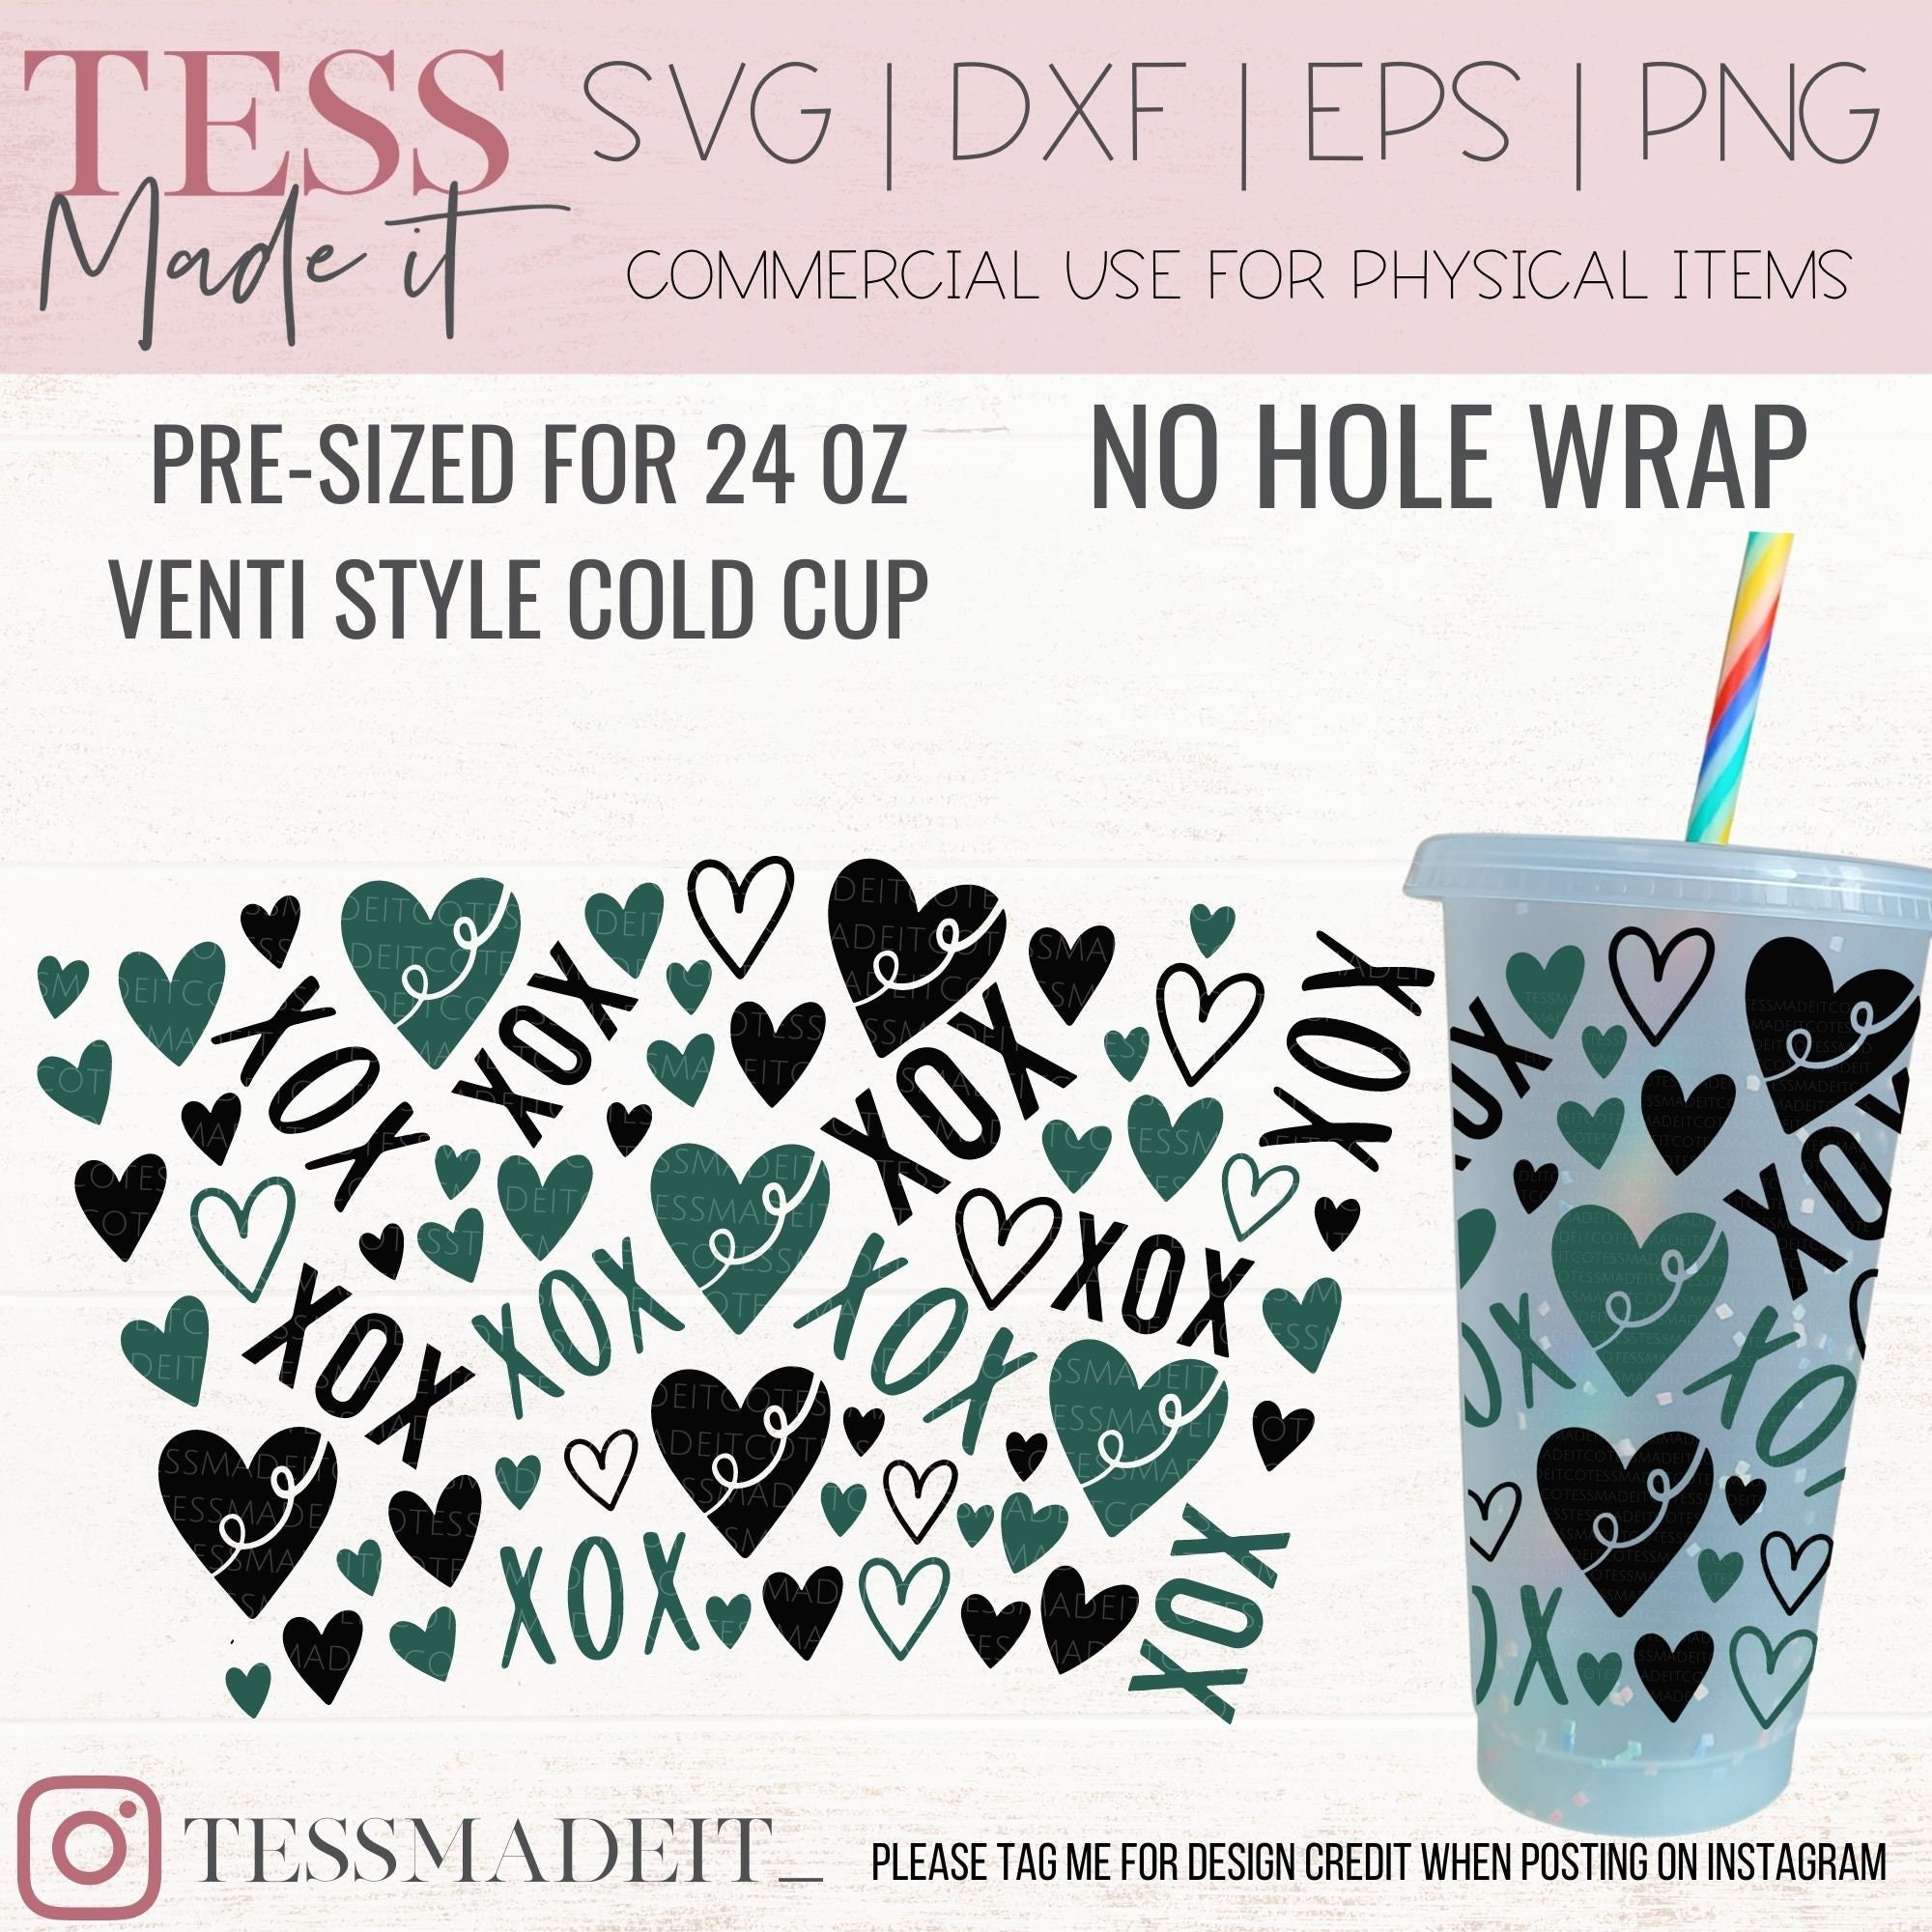 Floral Cold Cup SVG - Spring Venti Cup SVG - Tess Made It